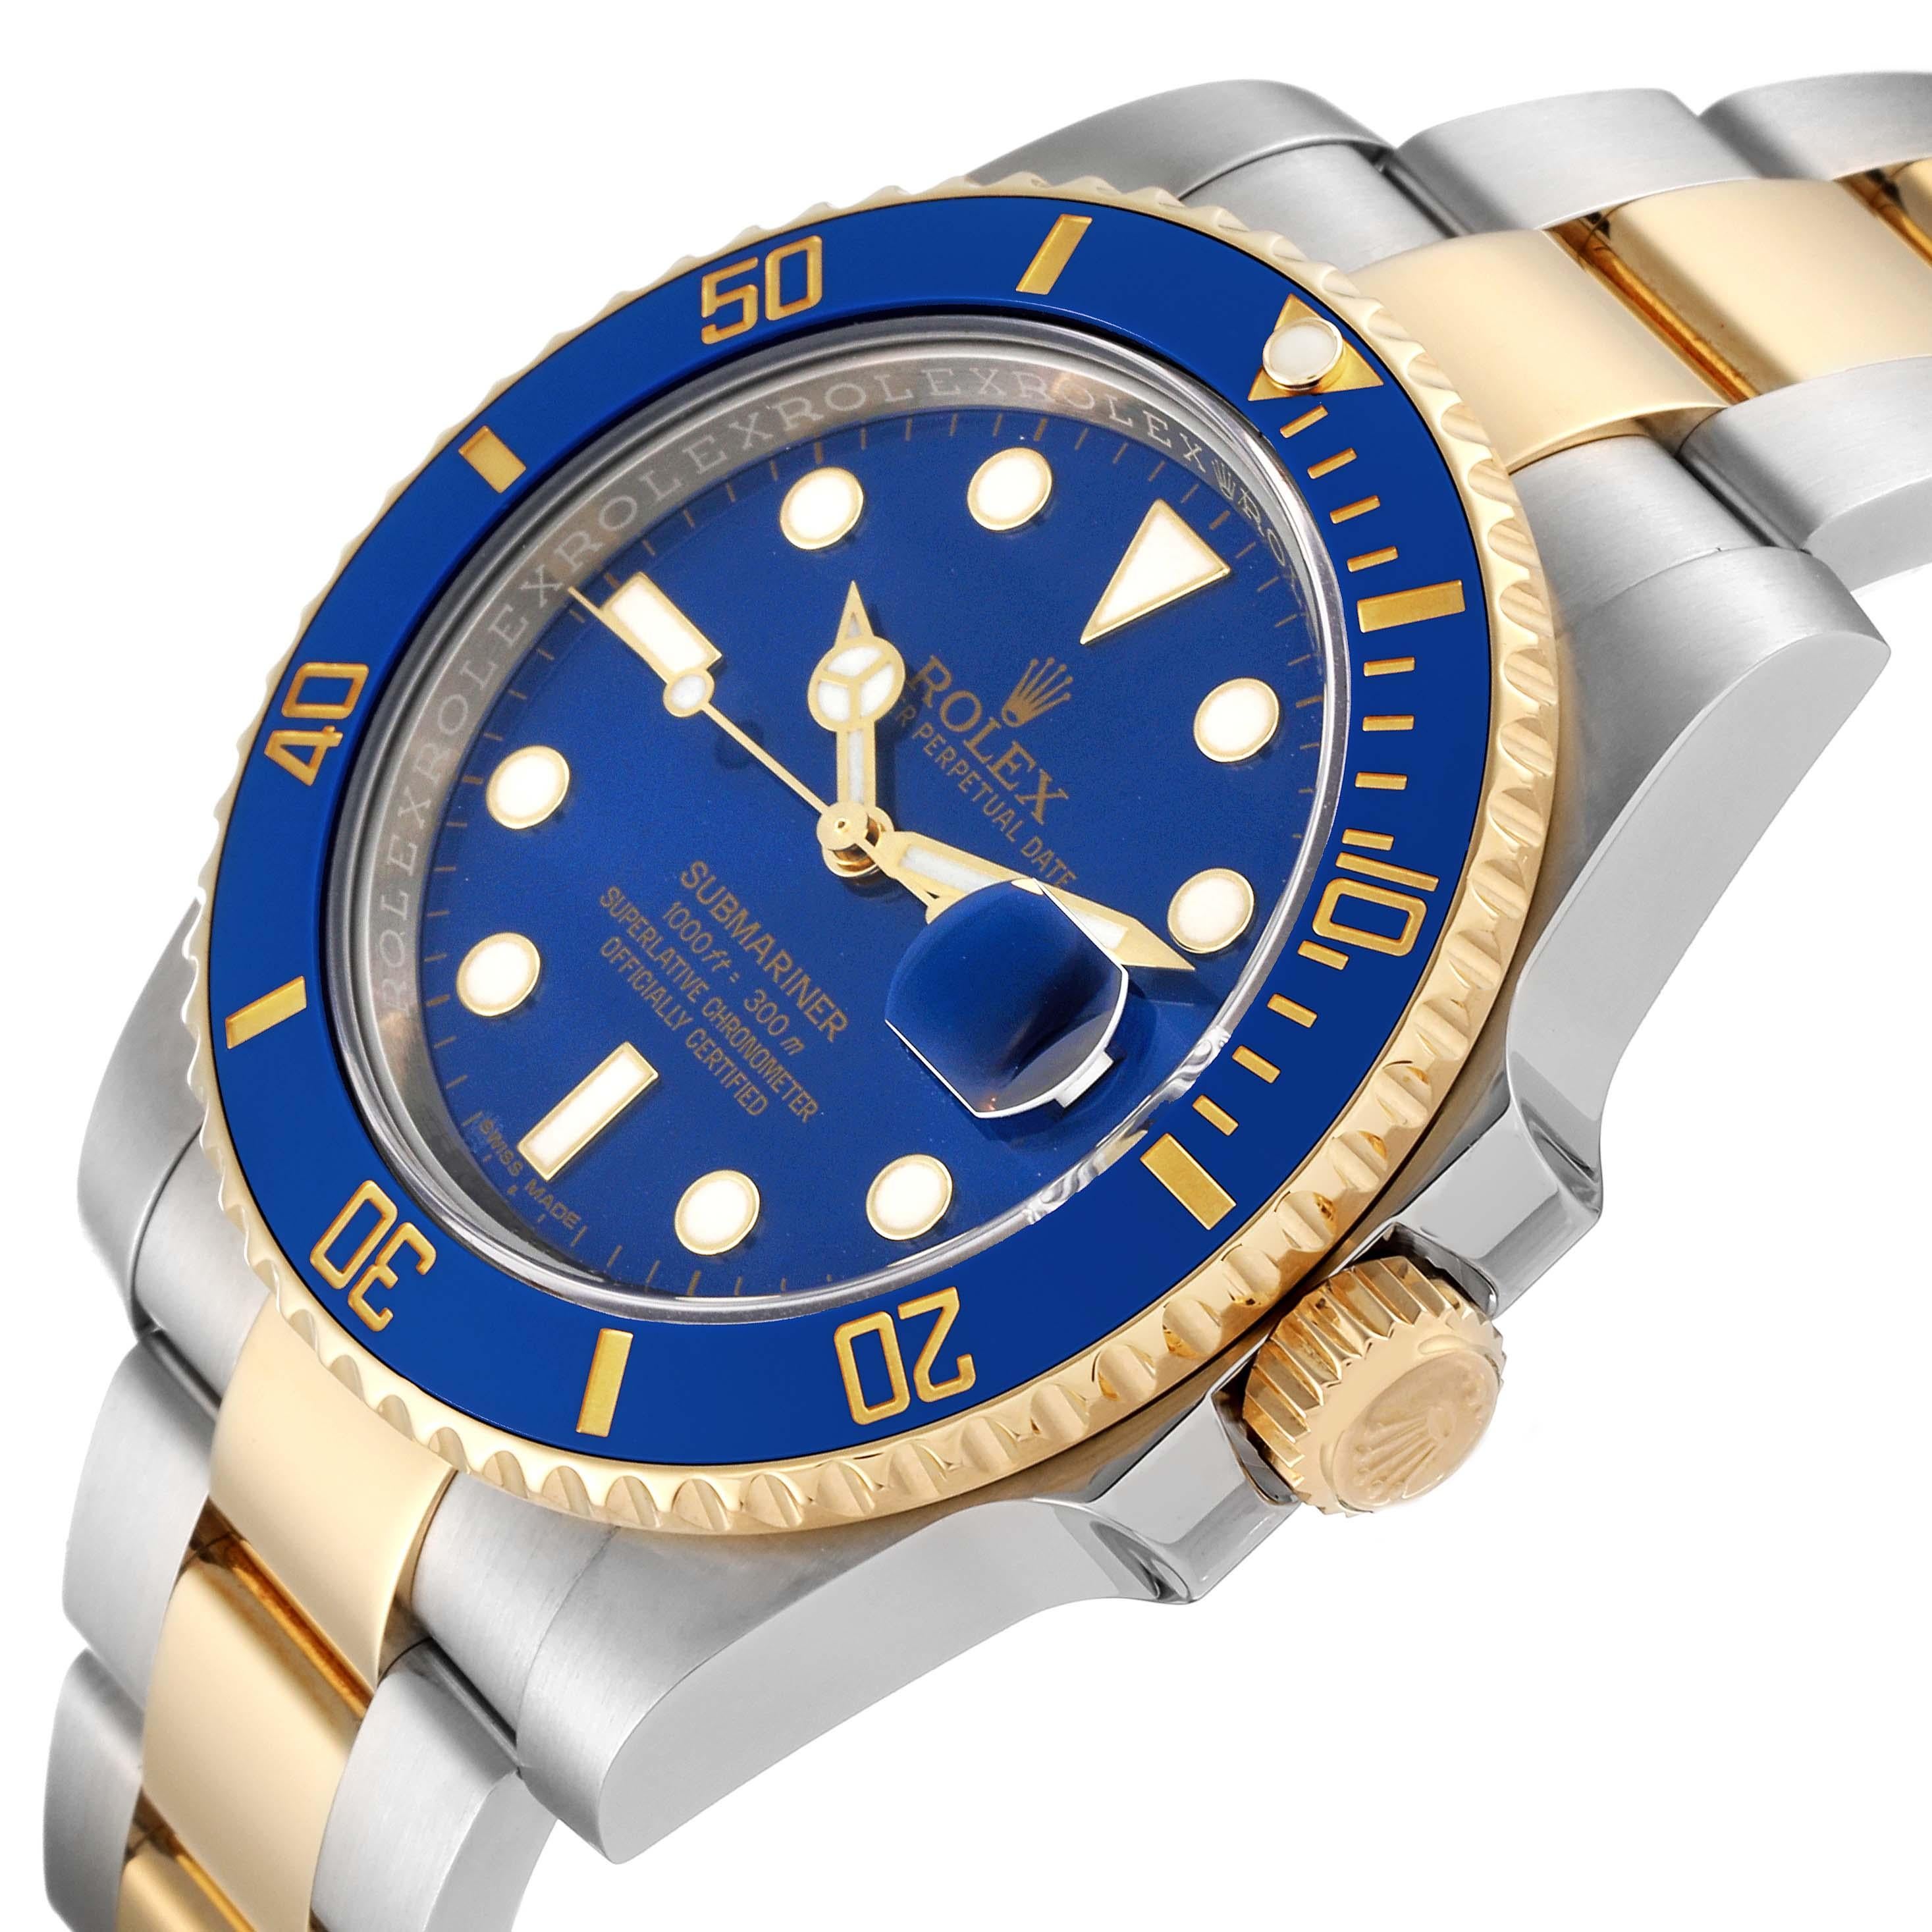 Rolex Submariner Steel Yellow Gold Blue Dial Mens Watch 116613 Box Card 2